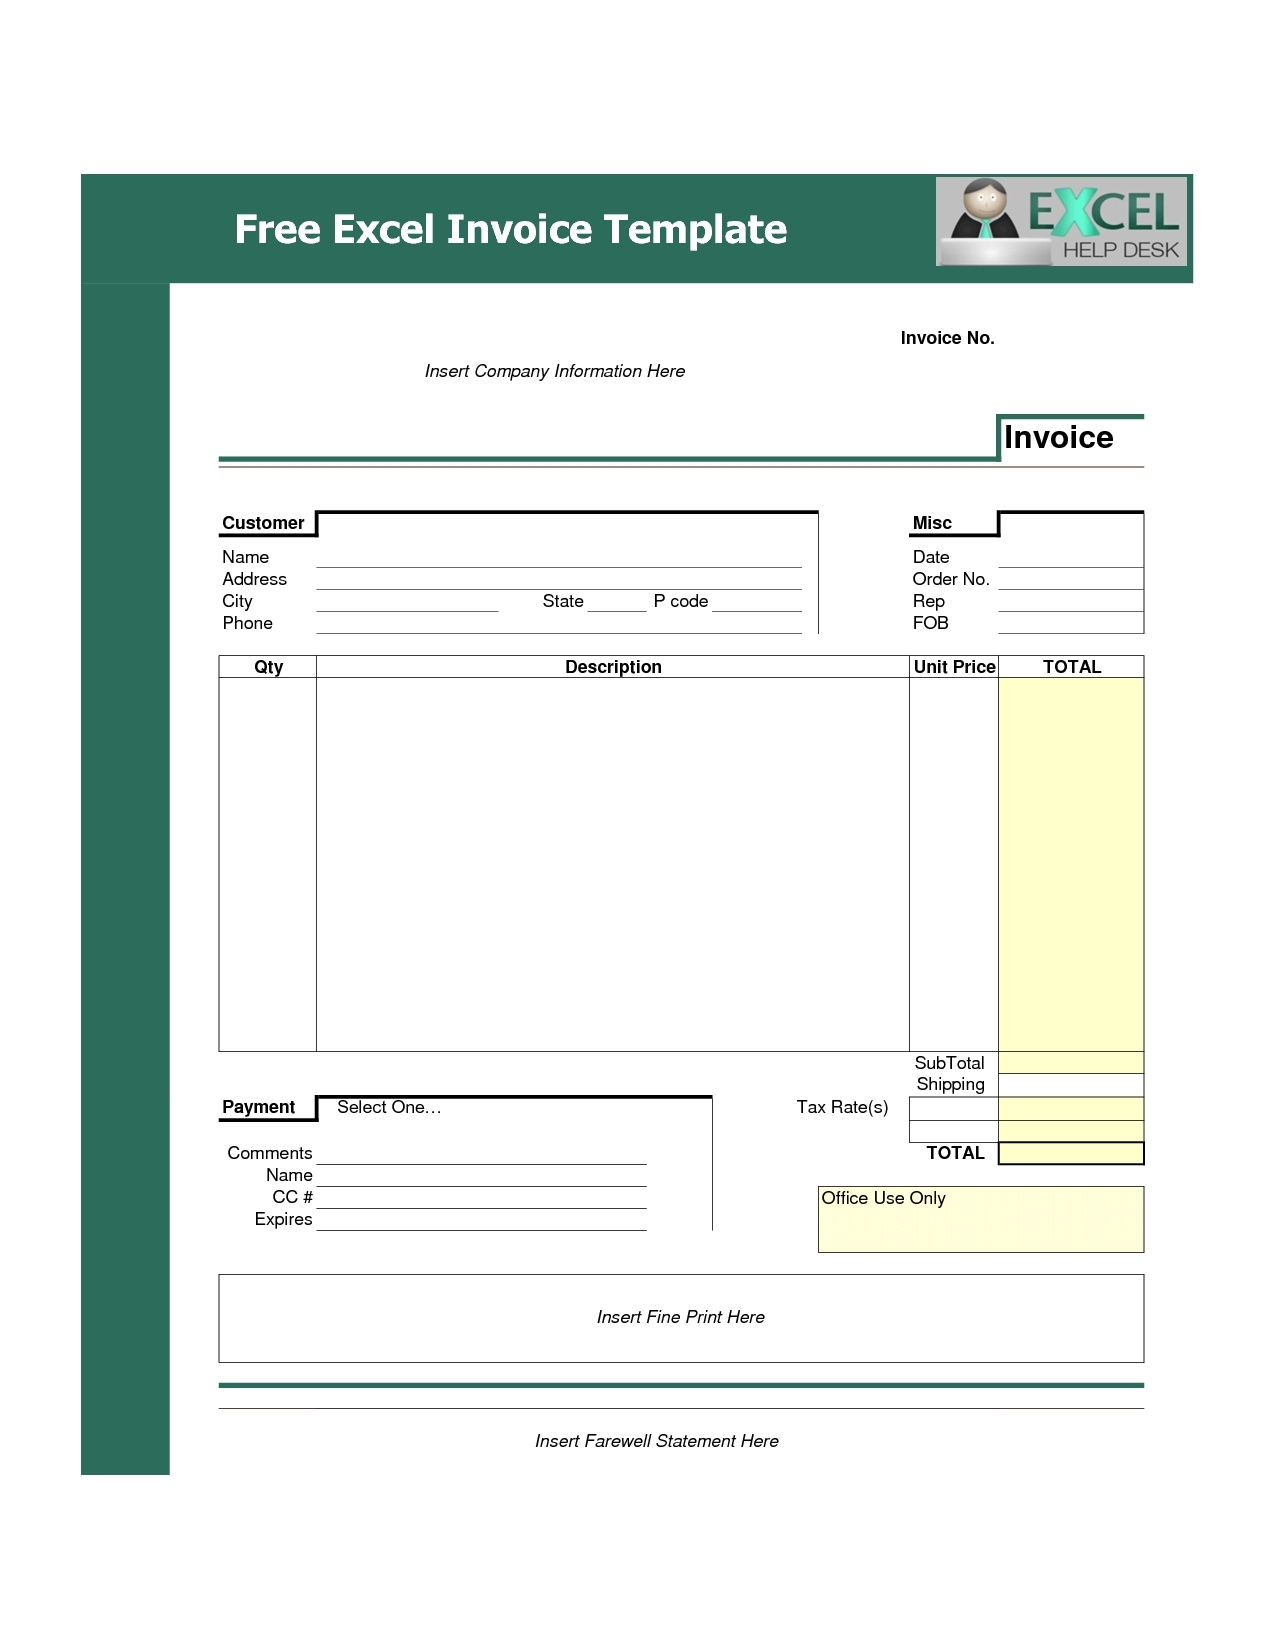 invoice excel template free download invoice template free 2016 download invoice template excel